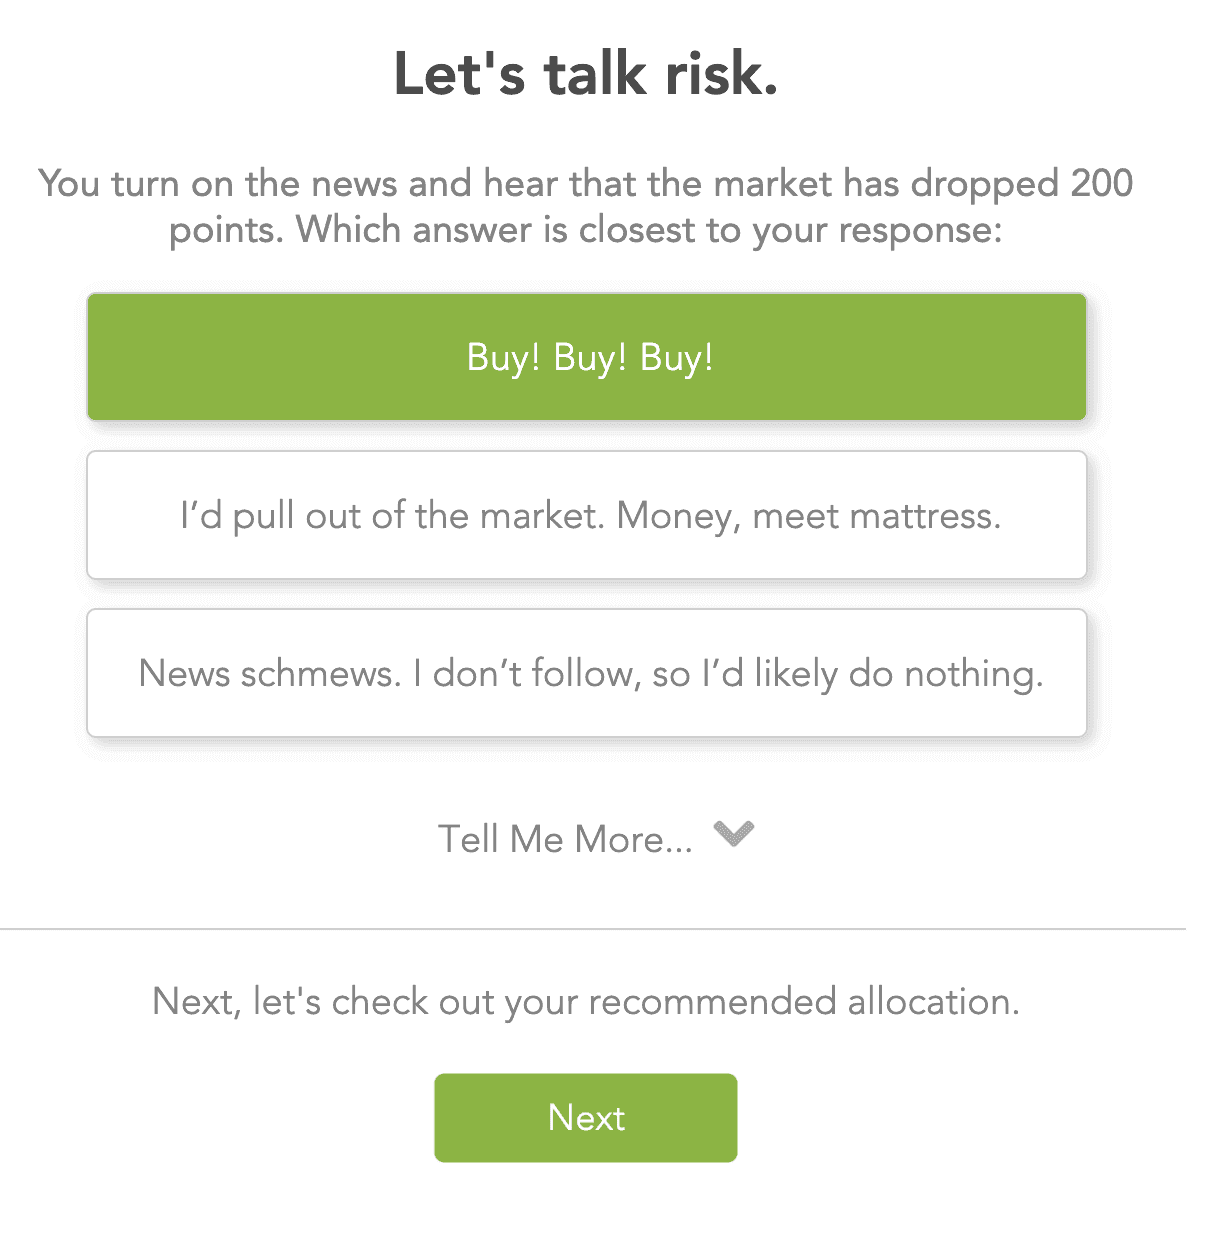 A question from the Blooom risk tolerance quiz.